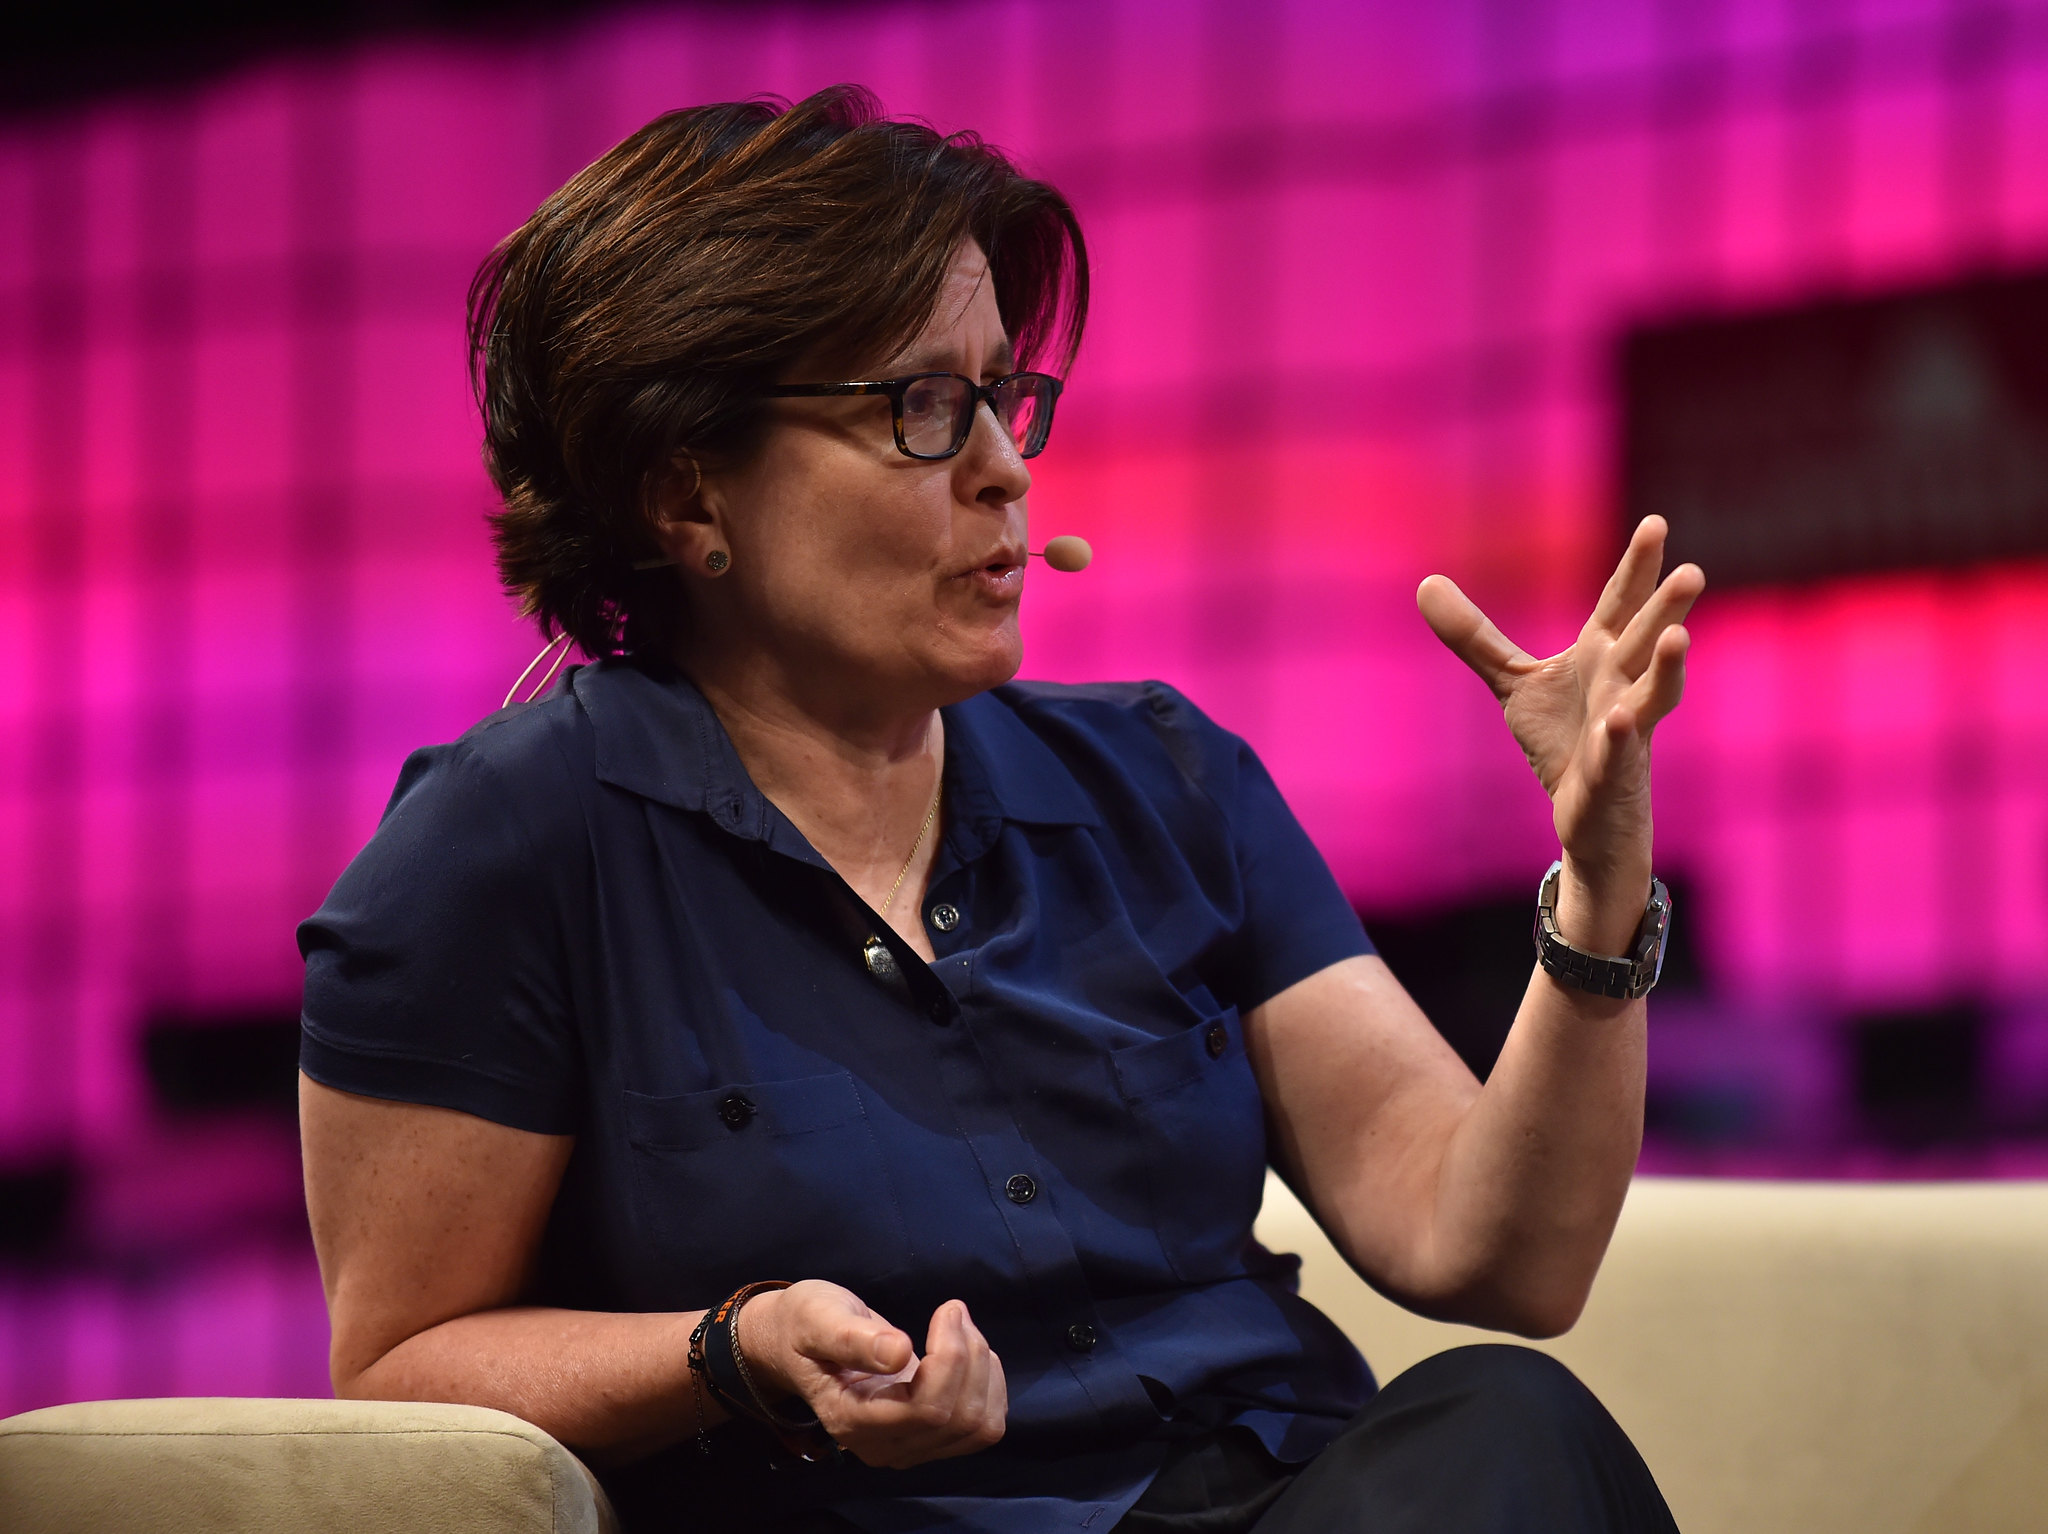 Kara Swisher, Executive Editor, Recode, on Centre Stage during day two of Web Summit